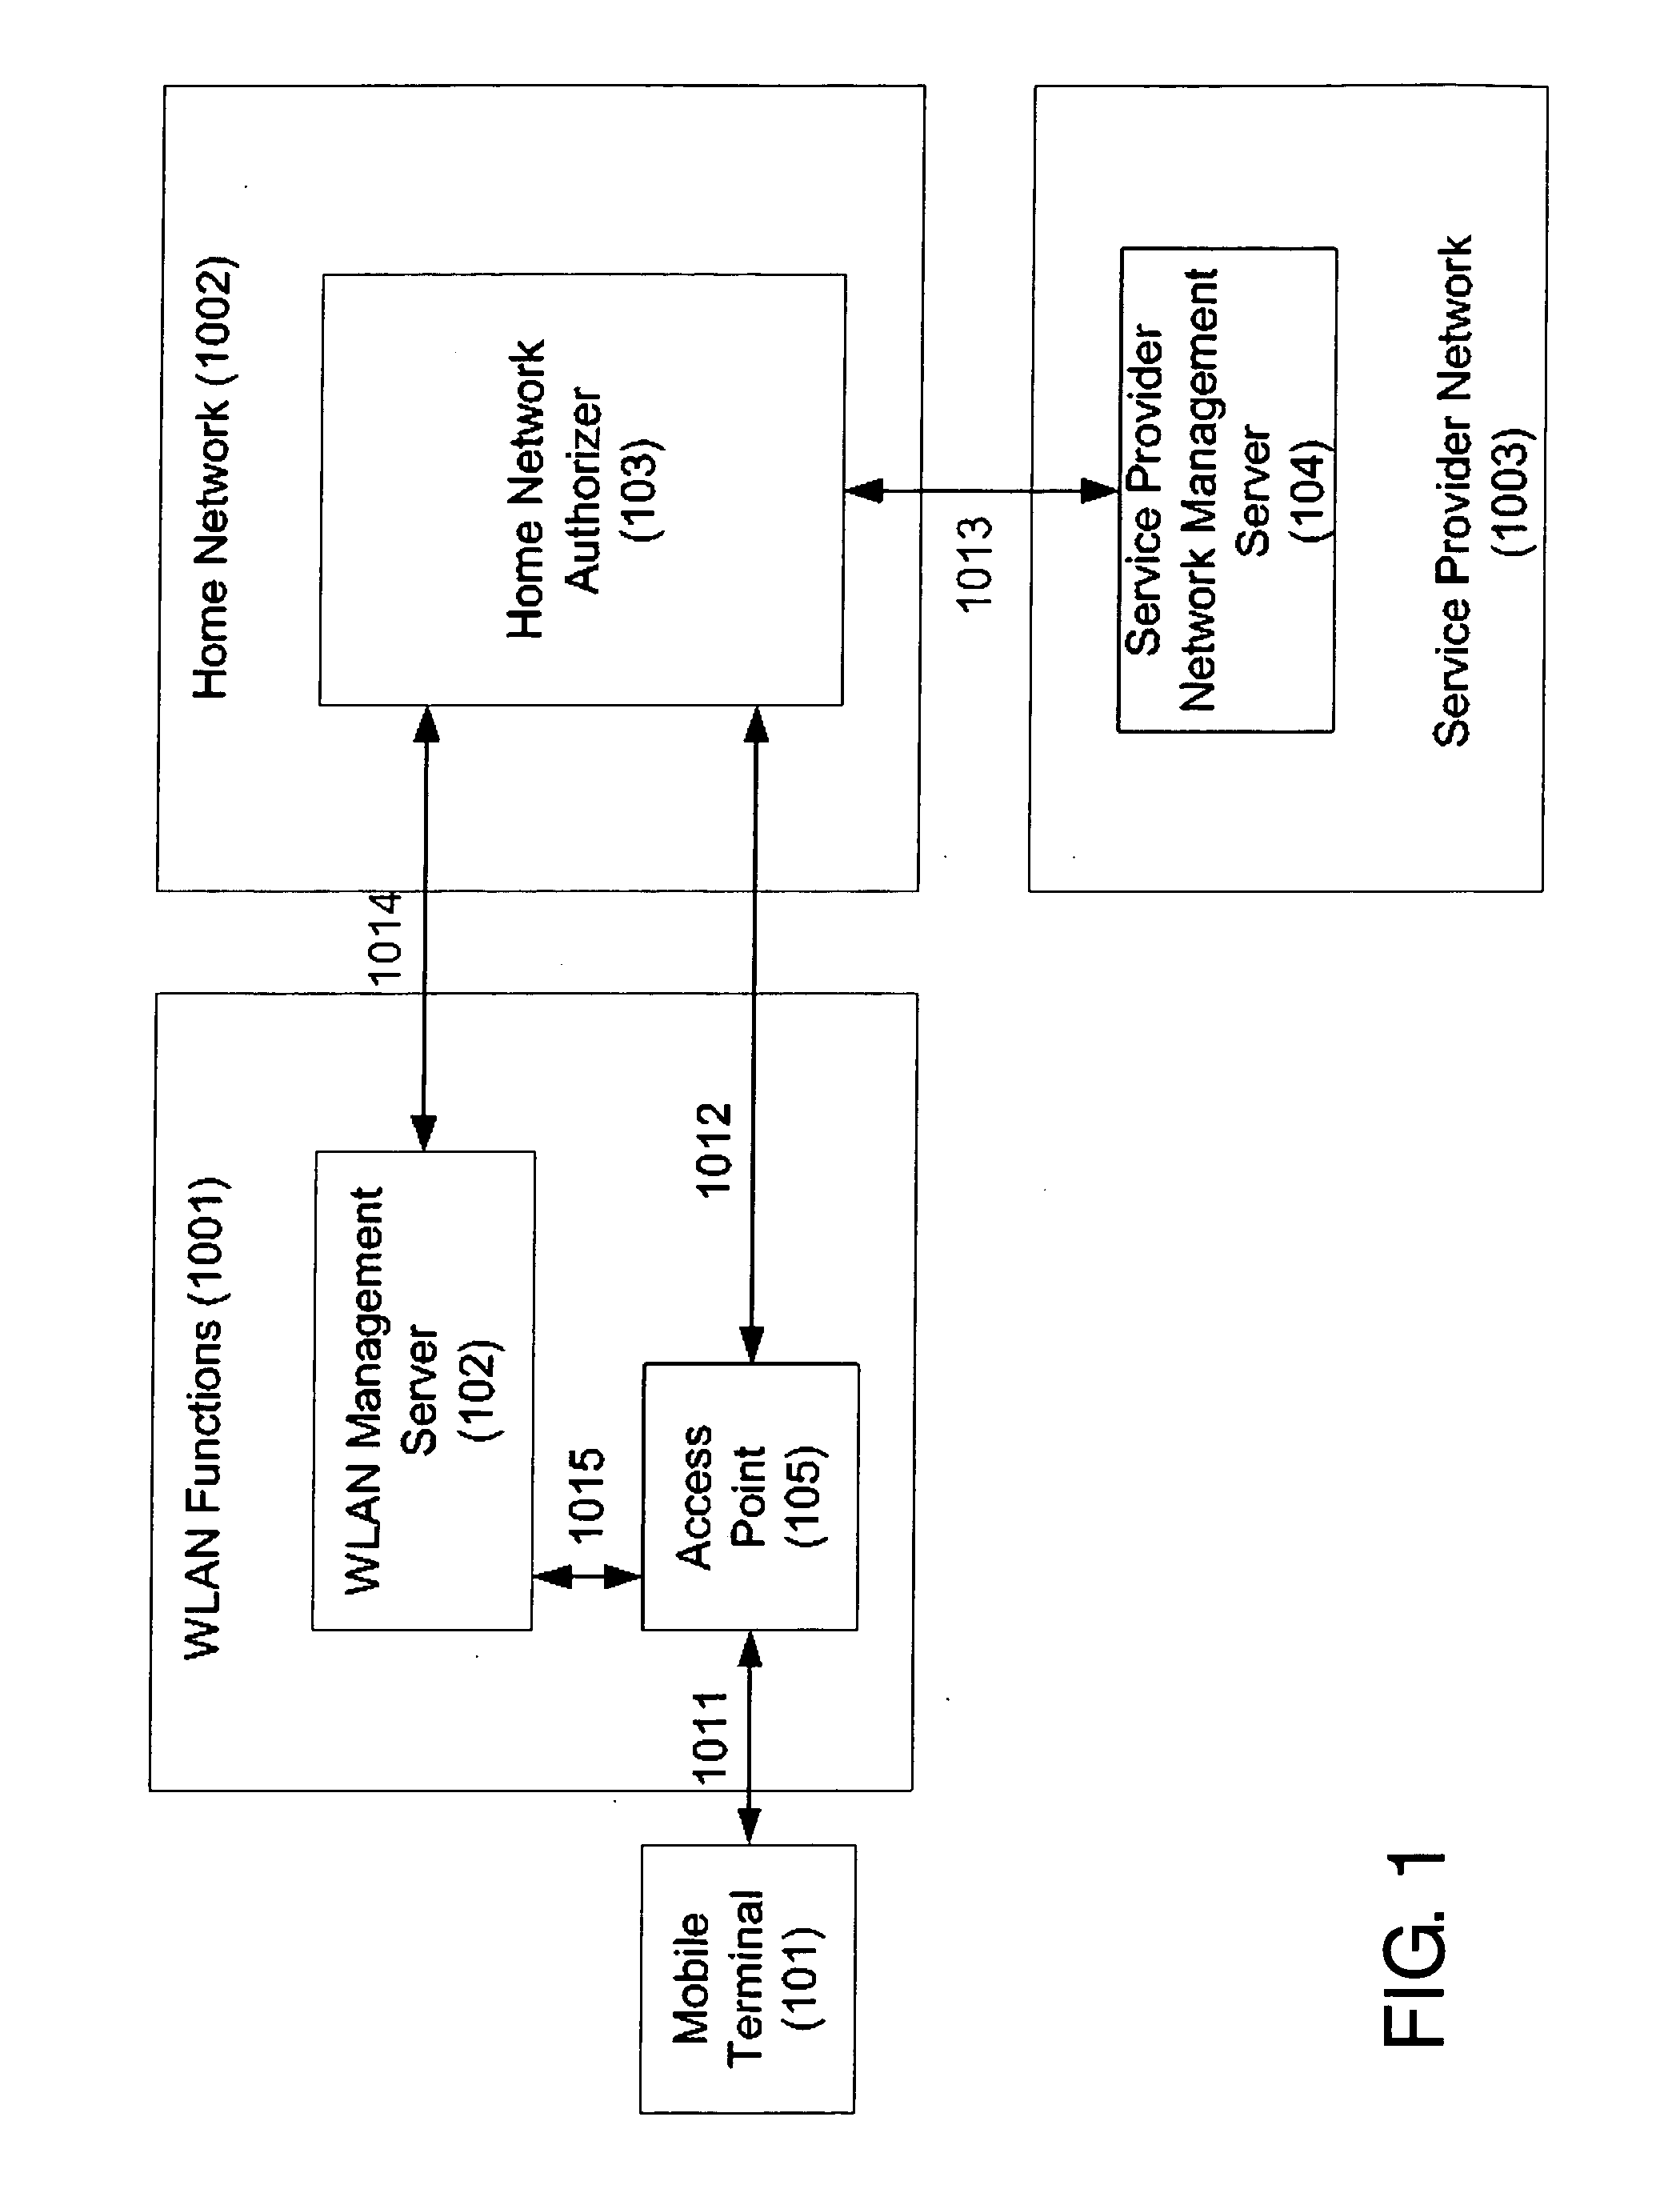 Service in wlan inter-working, address management system, and method